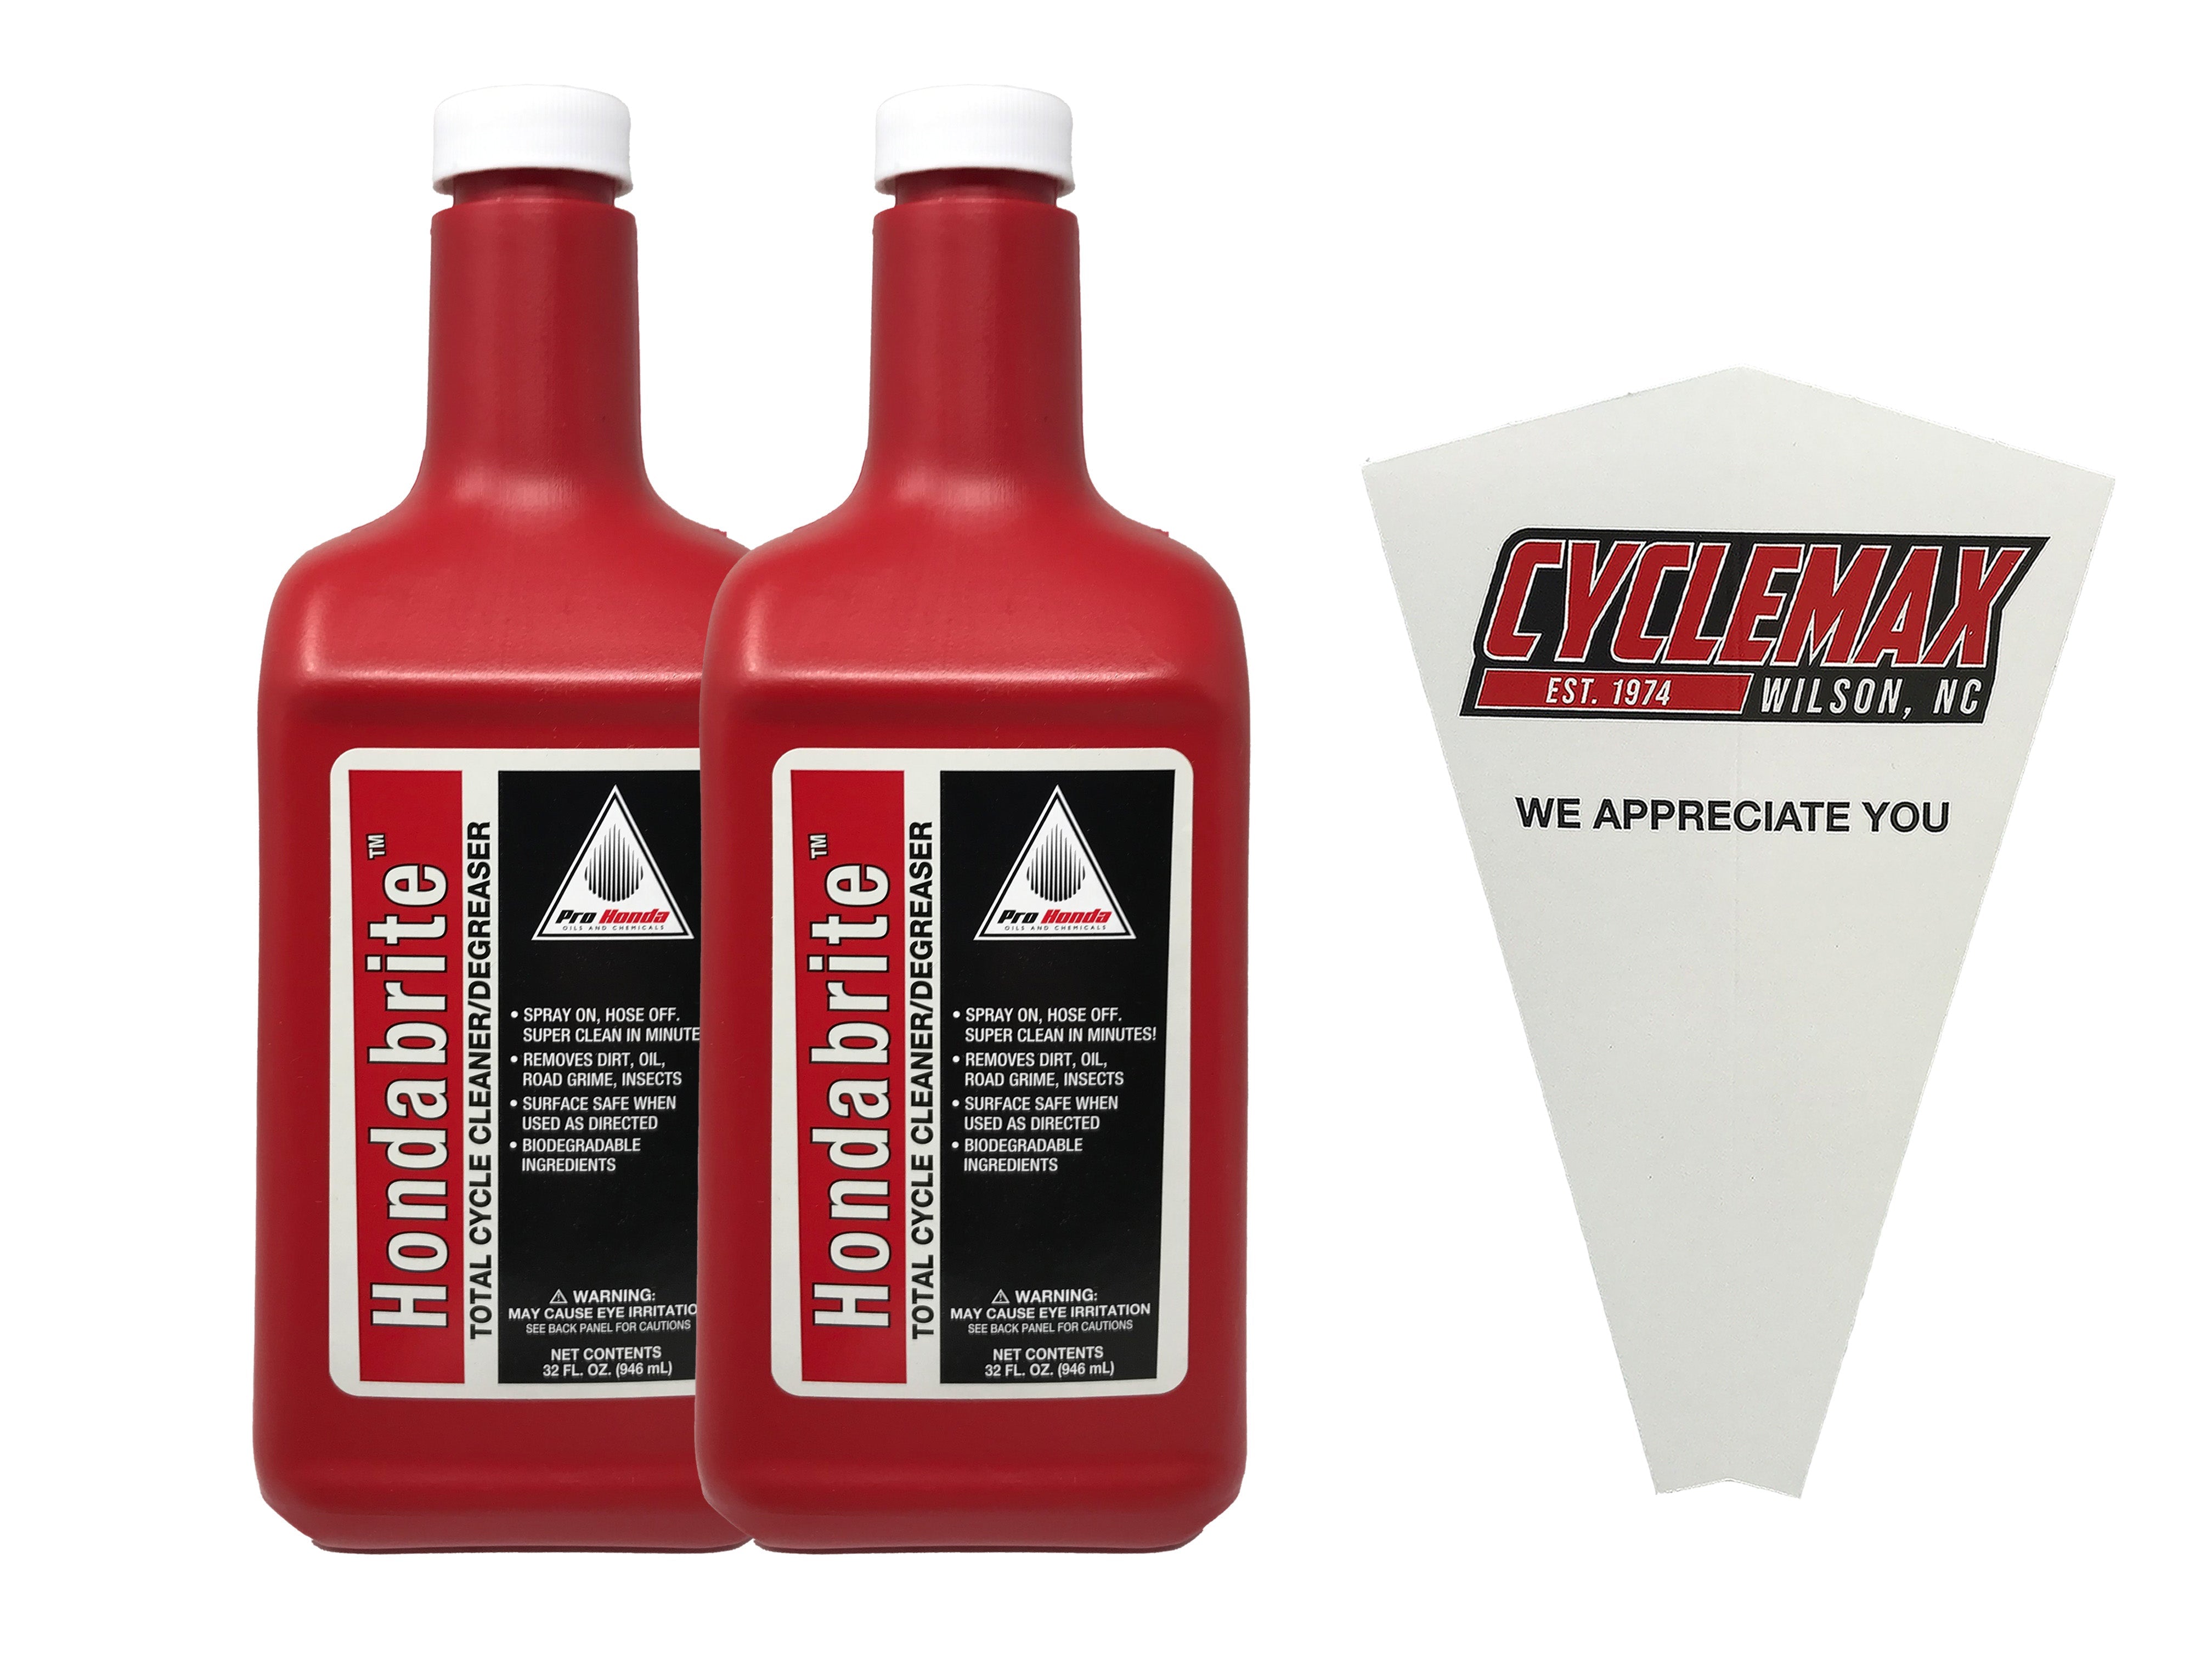 CYCLEMAX Two Pack for Honda Hondabrite Total Cycle Cleaner/Degreaser 08732-0032 Contains Two Quarts and a Funnel